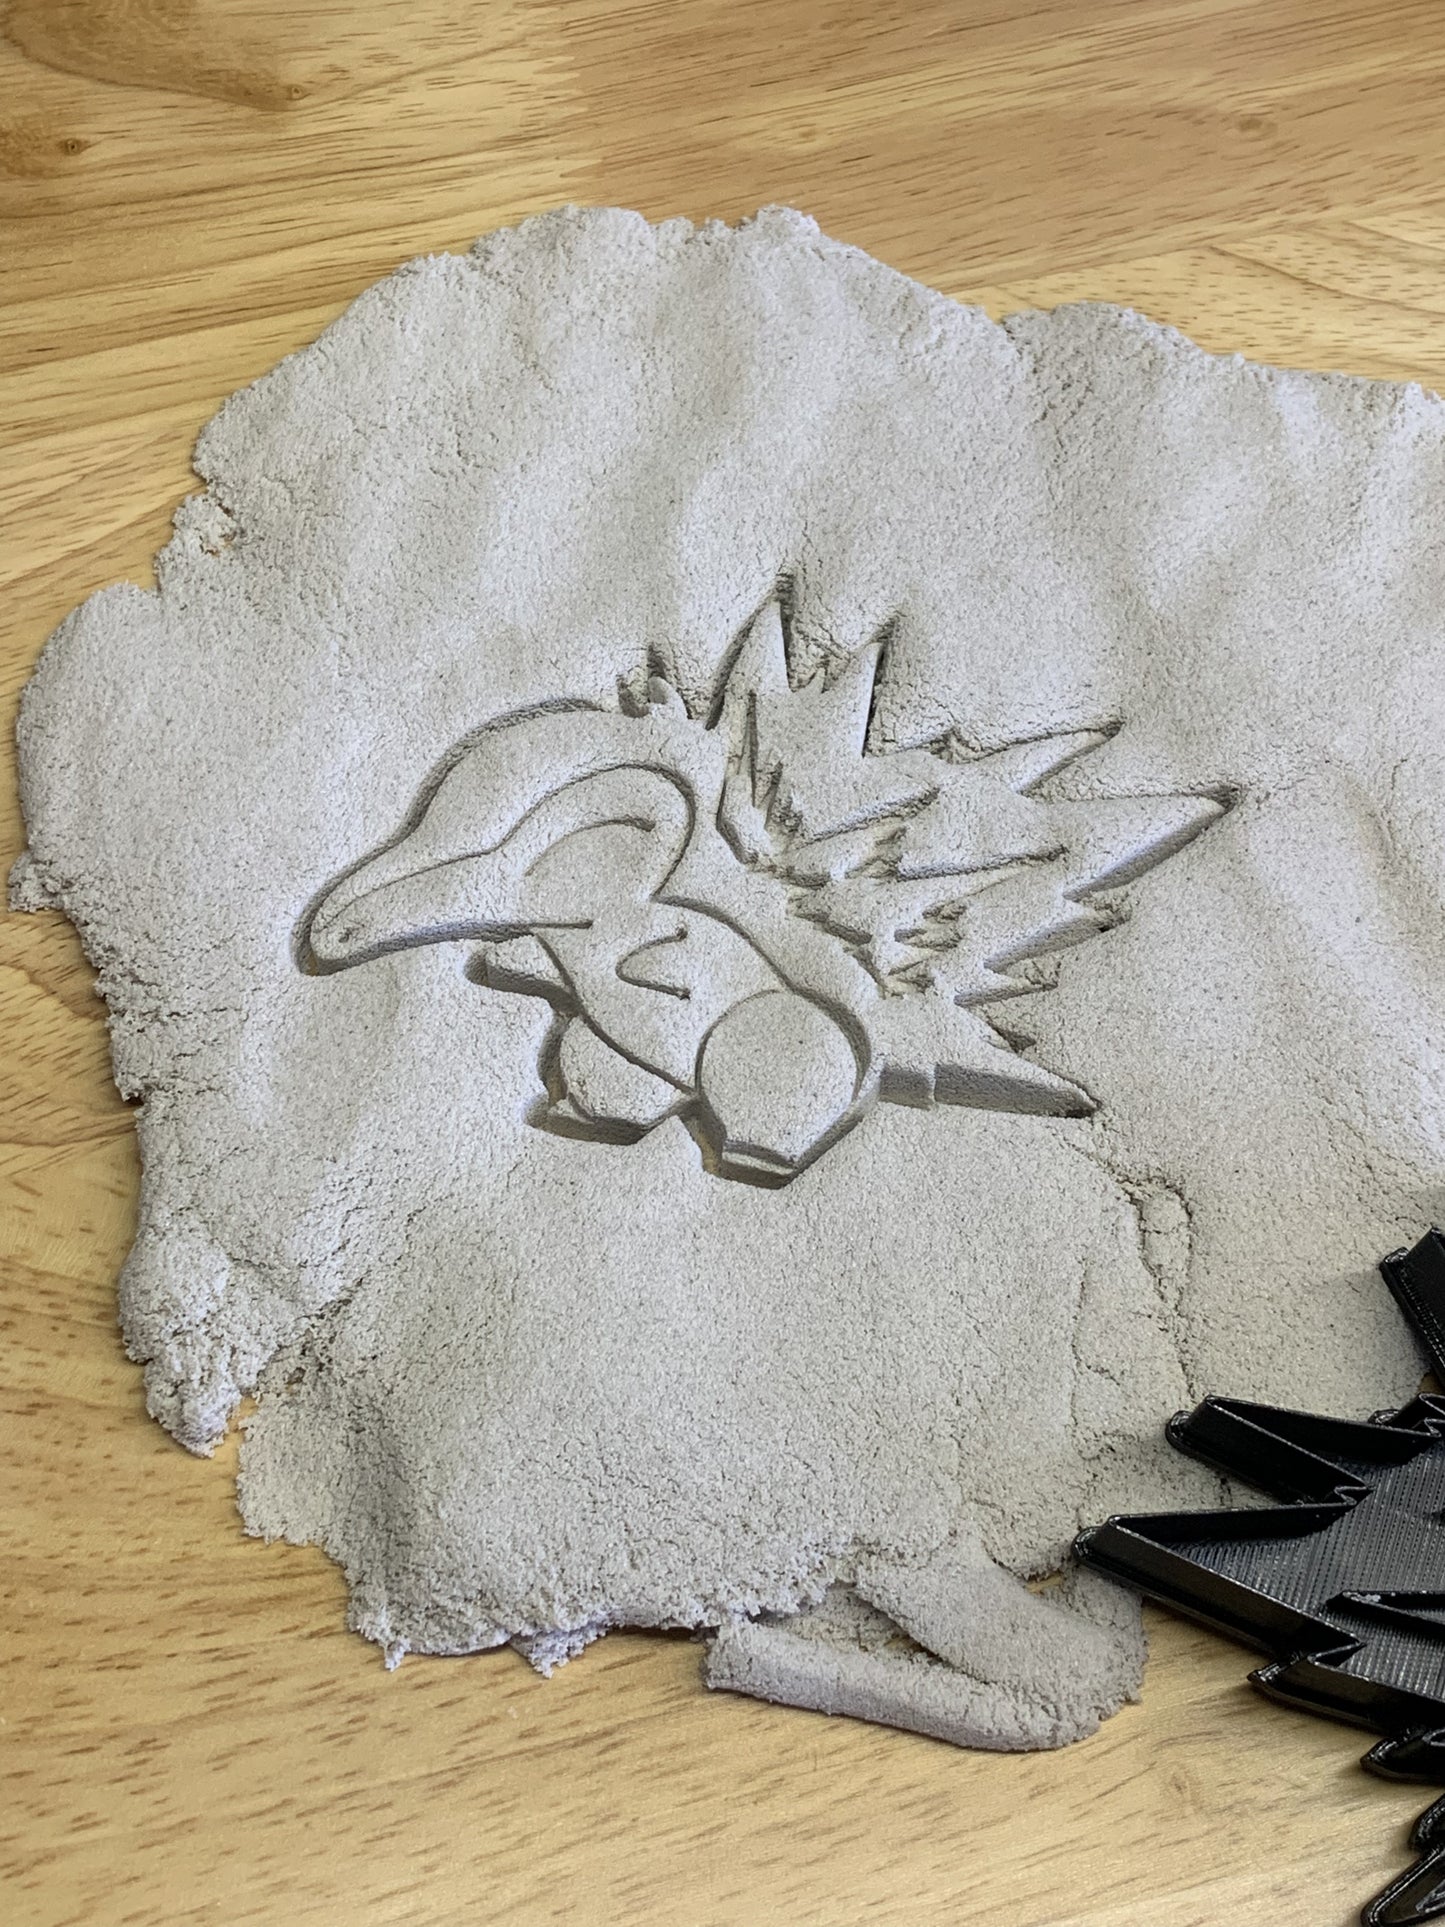 Cyndaquil Pokemon Inspired Cookie Cutter | Senac LLC | polymer clay dough cutter clay shape jewelry cutters